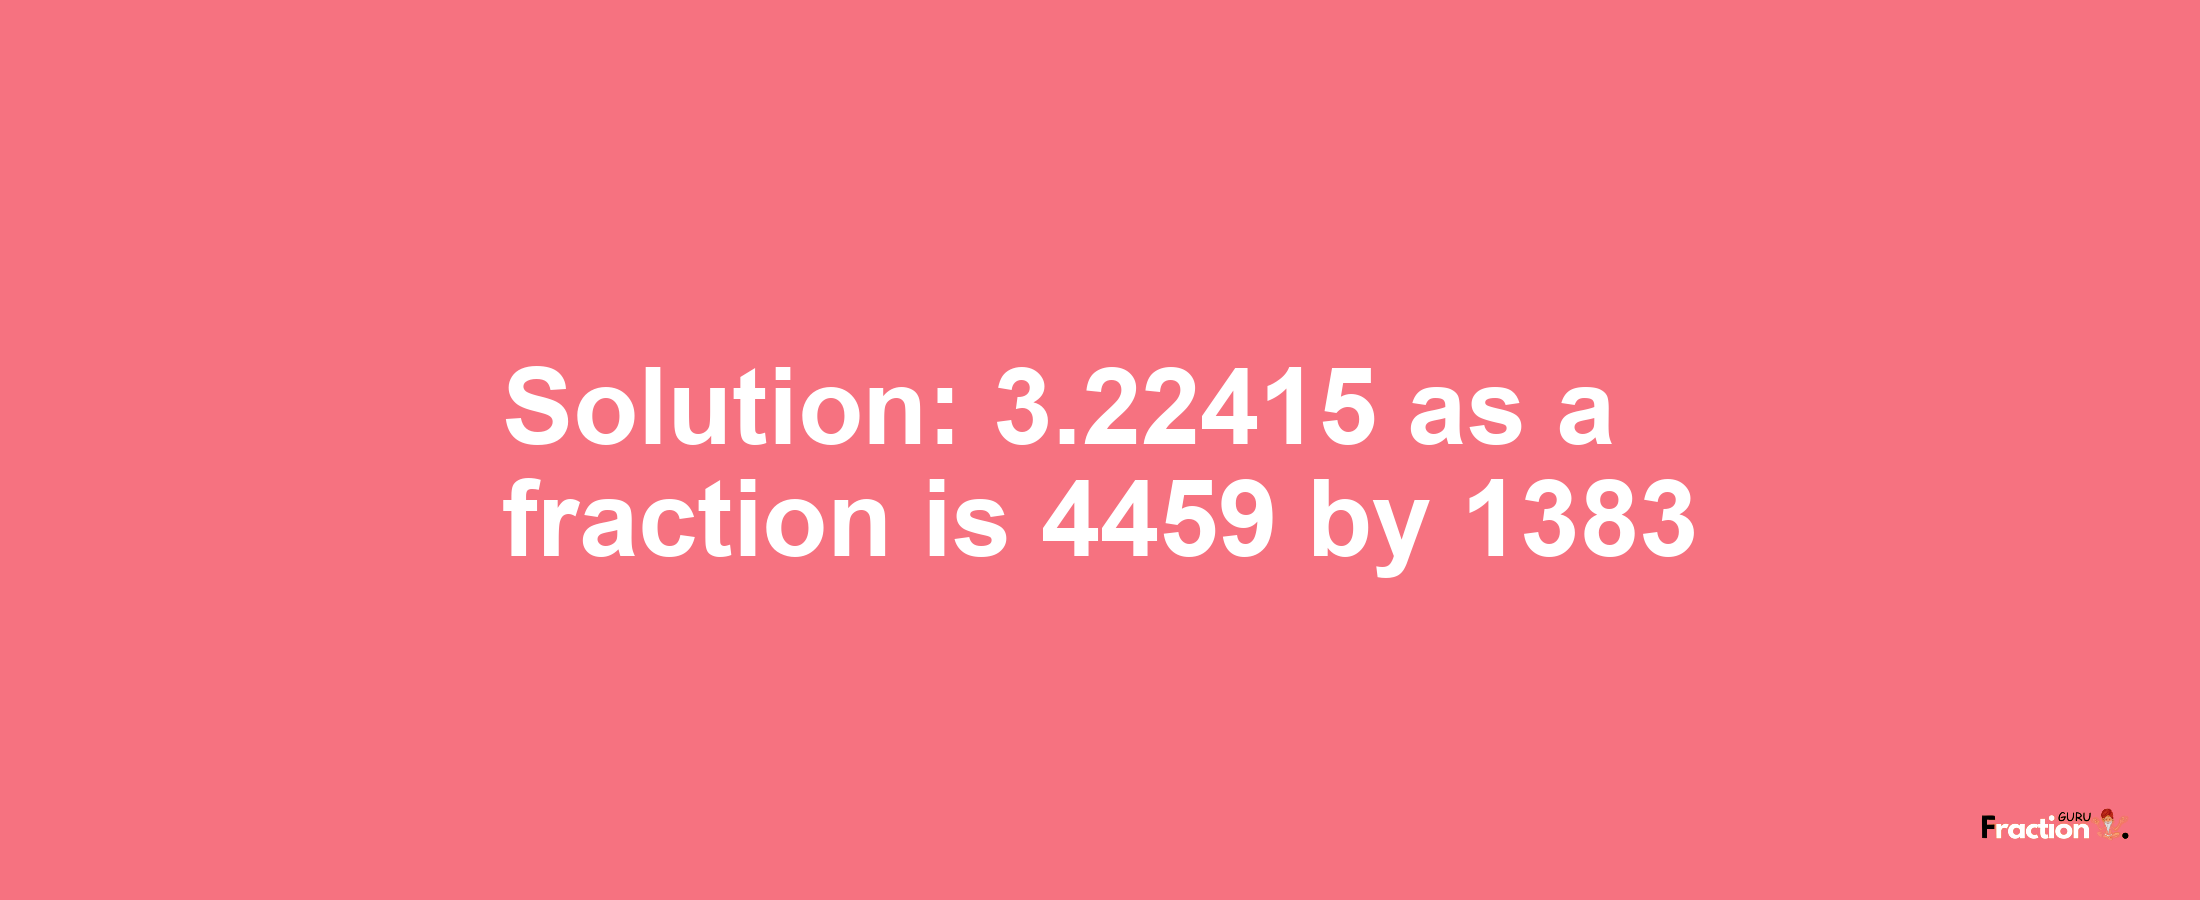 Solution:3.22415 as a fraction is 4459/1383